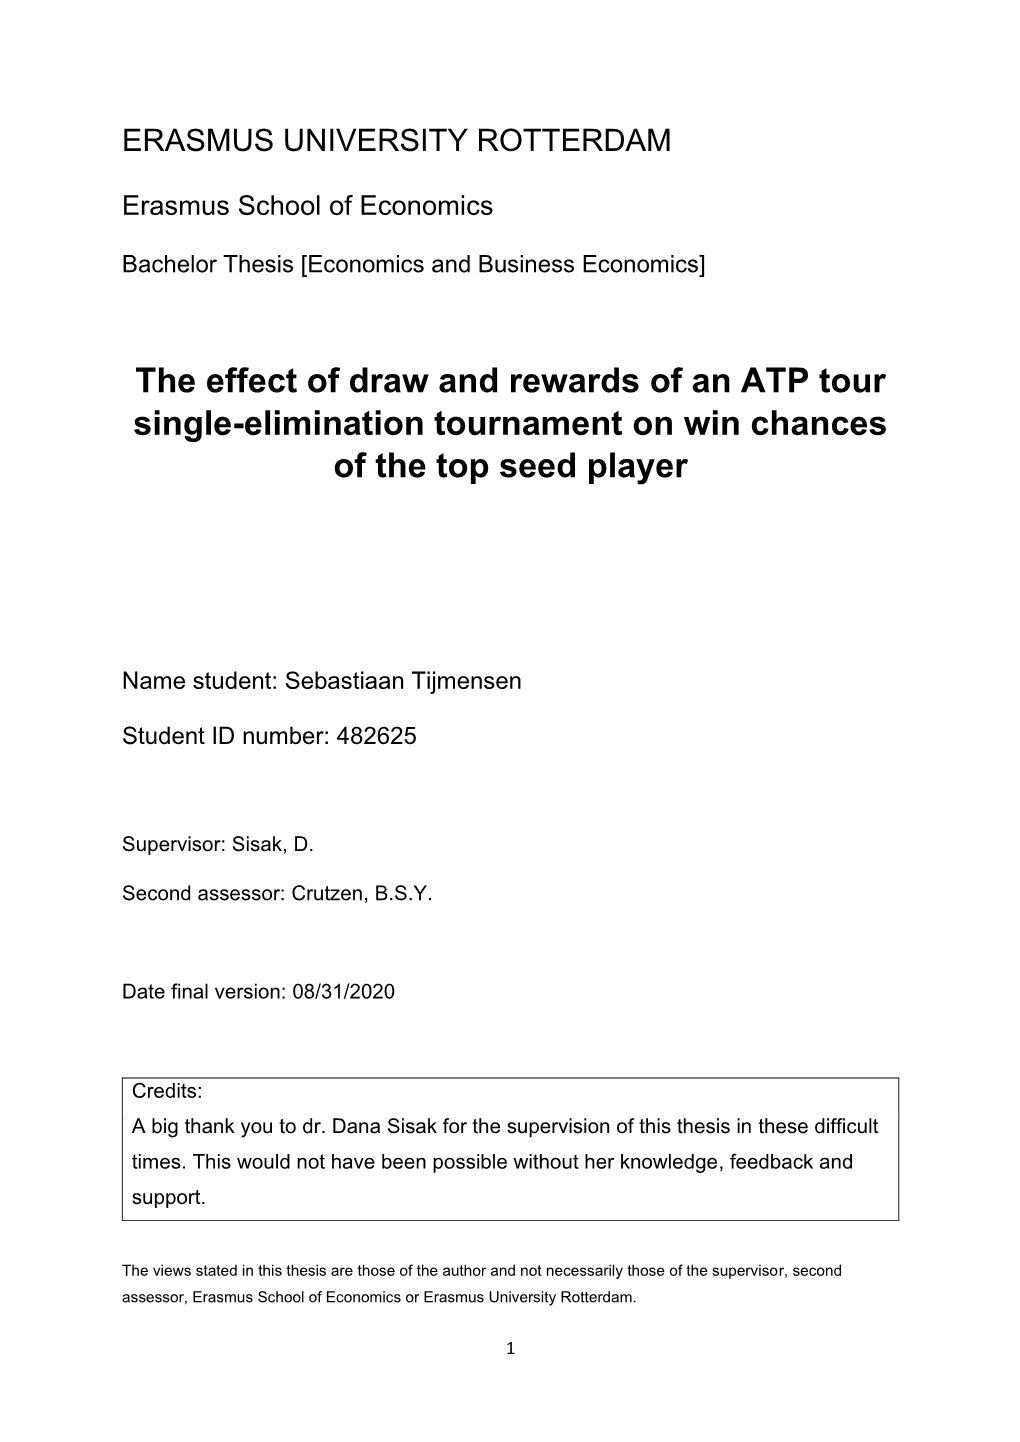 The Effect of Draw and Rewards of an ATP Tour Single-Elimination Tournament on Win Chances of the Top Seed Player